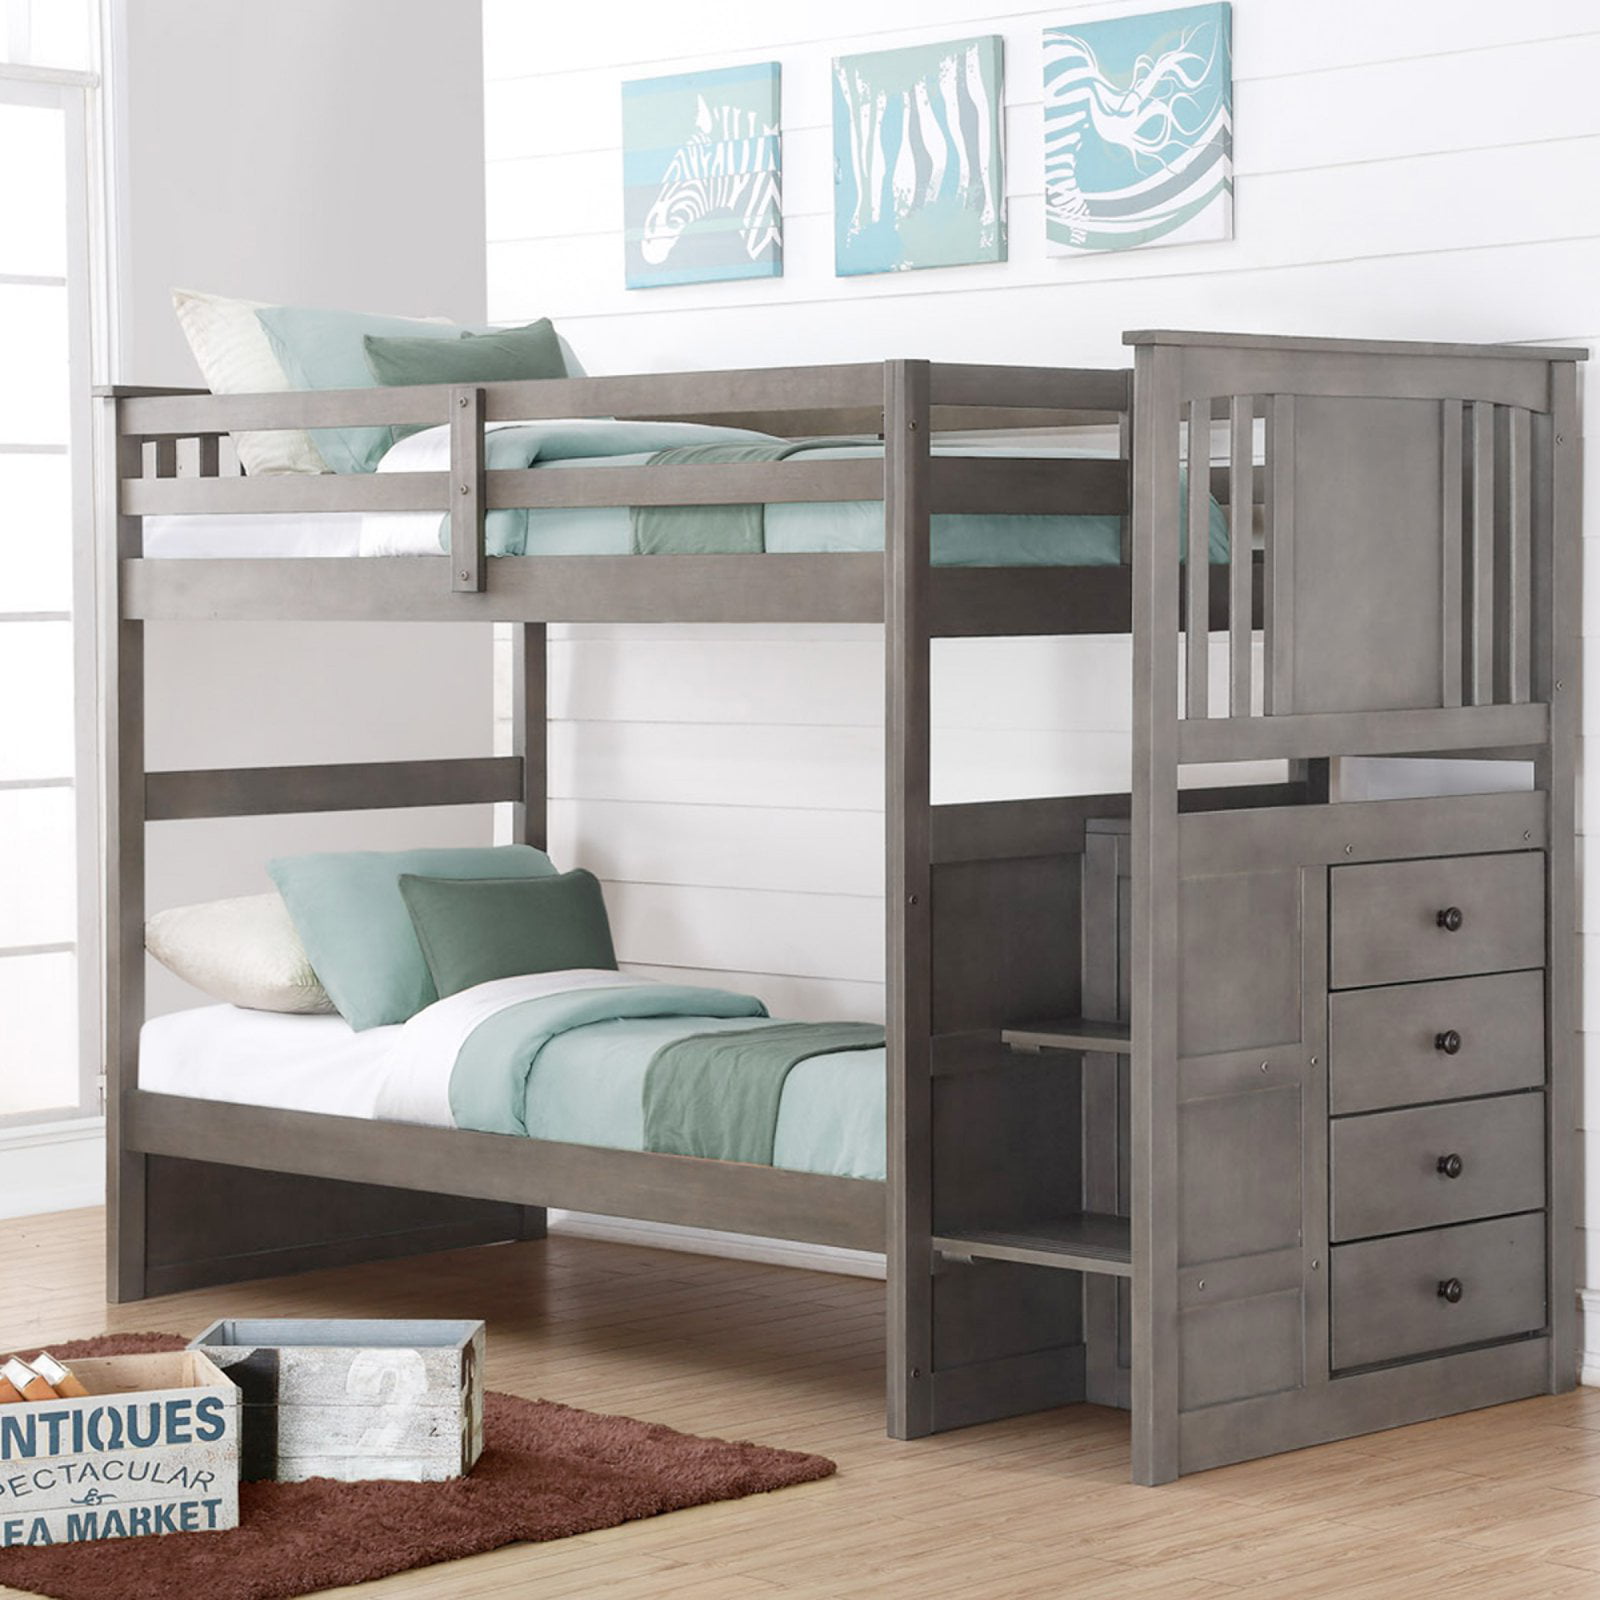 Donco Kids Twin Over Stairway Bunk, Donco Twin Over Full Bunk Bed